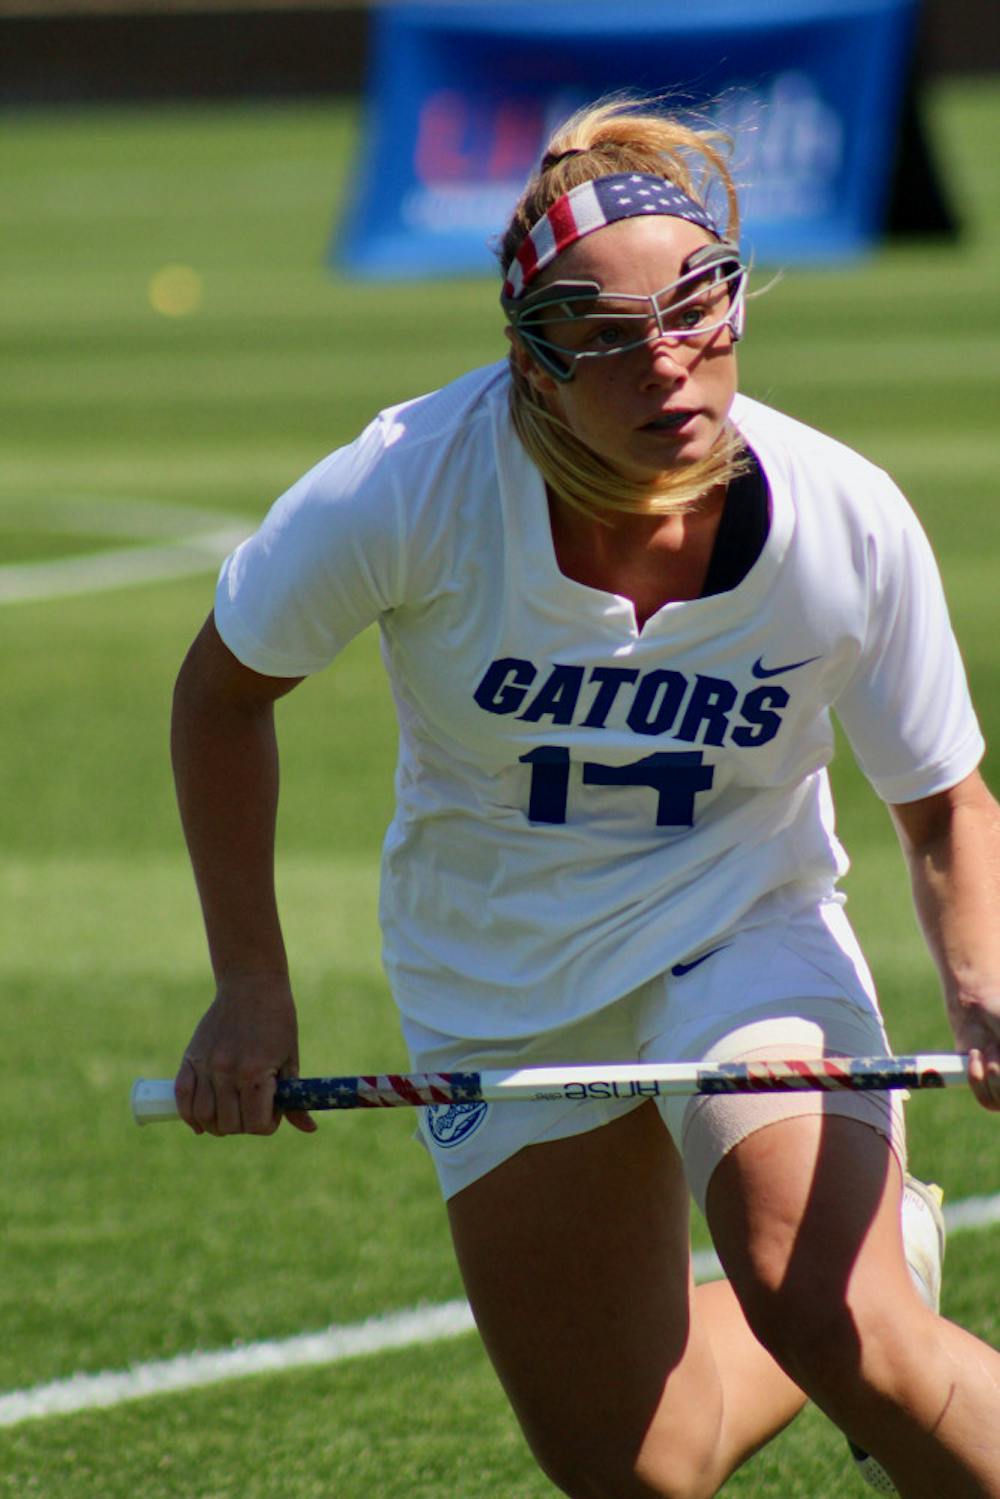 <p>Attacker Lindsey Ronbeck is expected back for the Gators after missing last game with an injury.</p>